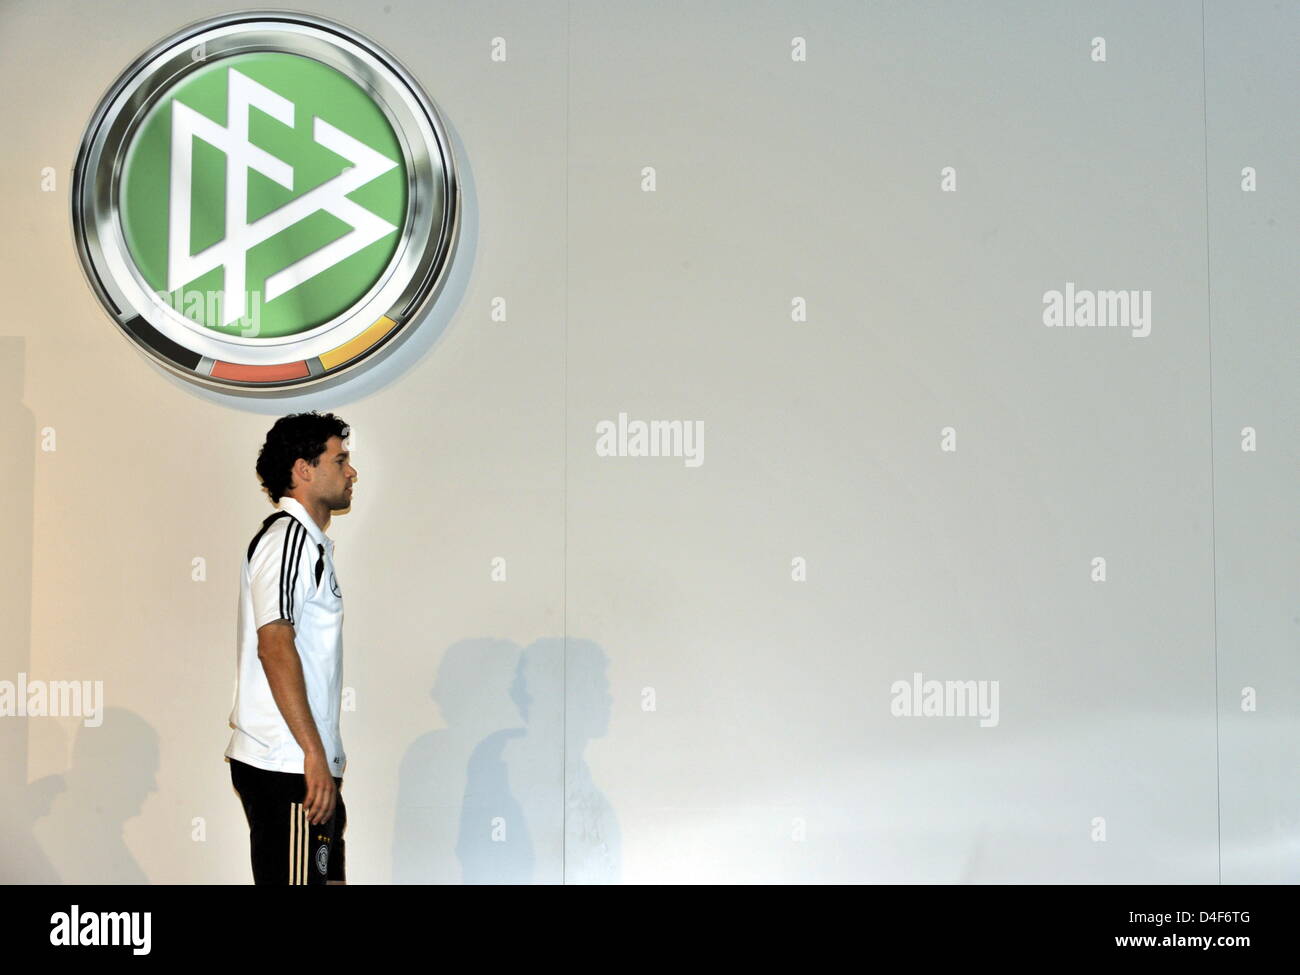 Germany's Captain Michael Ballack during a press conference of German national soccer team in Tenero near Locarno, Switzerland, 15 June 2008. Foto: Peter Kneffel dpa +++###dpa###+++ Stock Photo